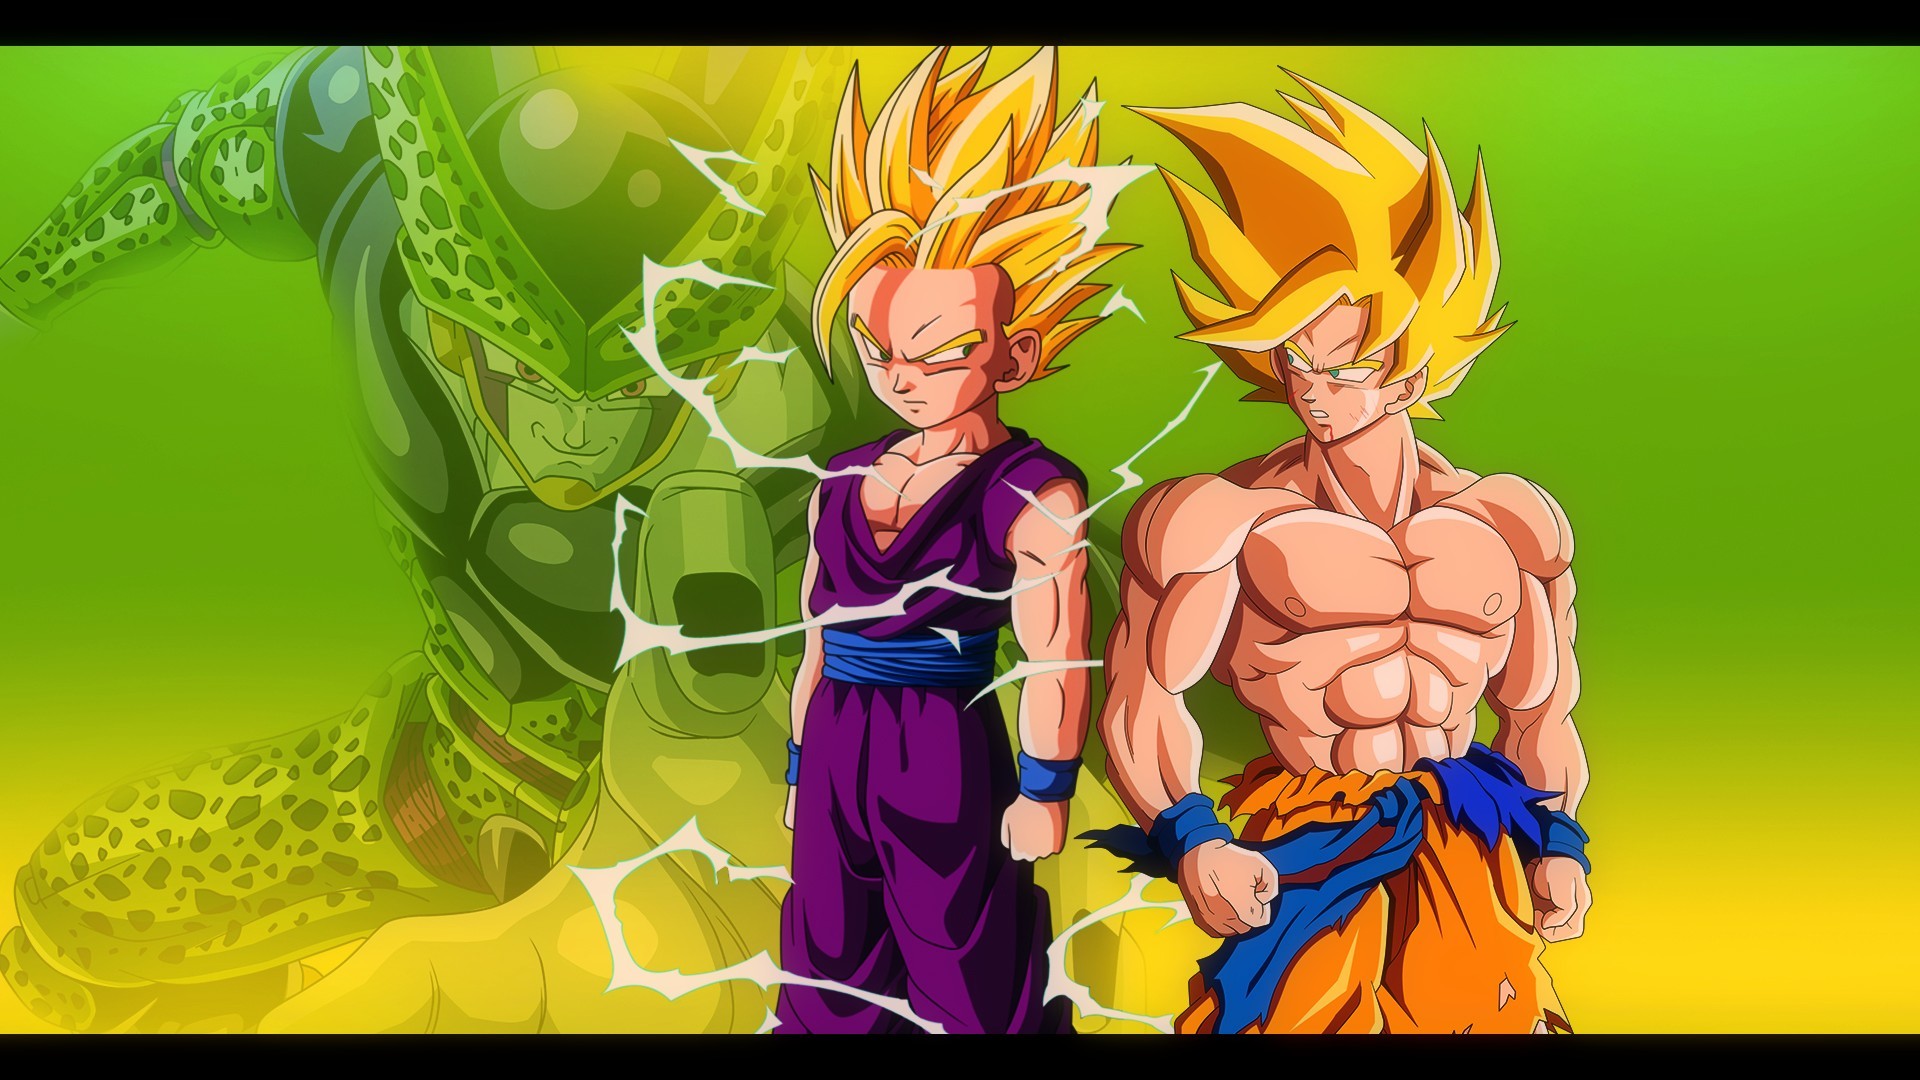 1920x1080 Goku and Gohan vs Cell - DBZ Wallpaper 1920*1080 by Oirigns on .